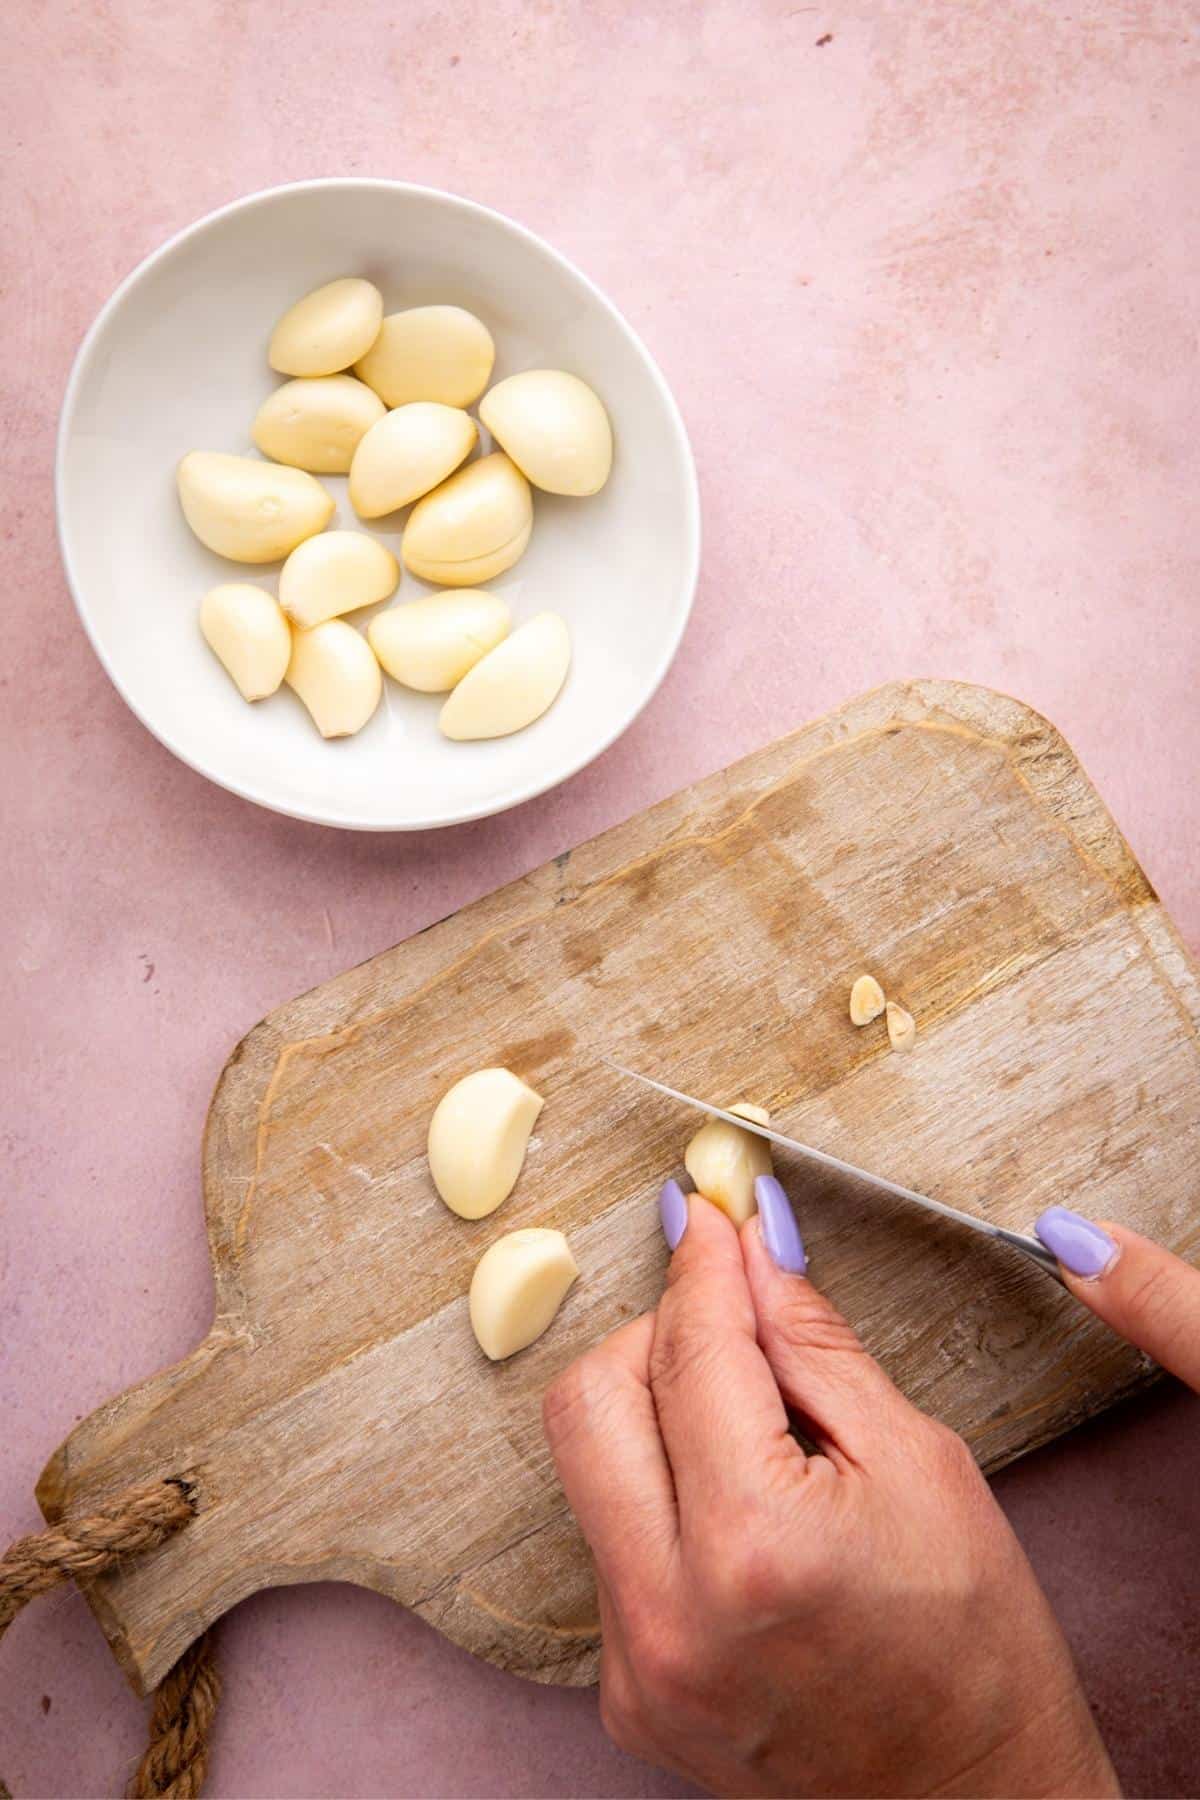 Start by peeling the skin off the garlic cloves. Place the clove on a cutting board, use a sharp paring knife to remove the root end.